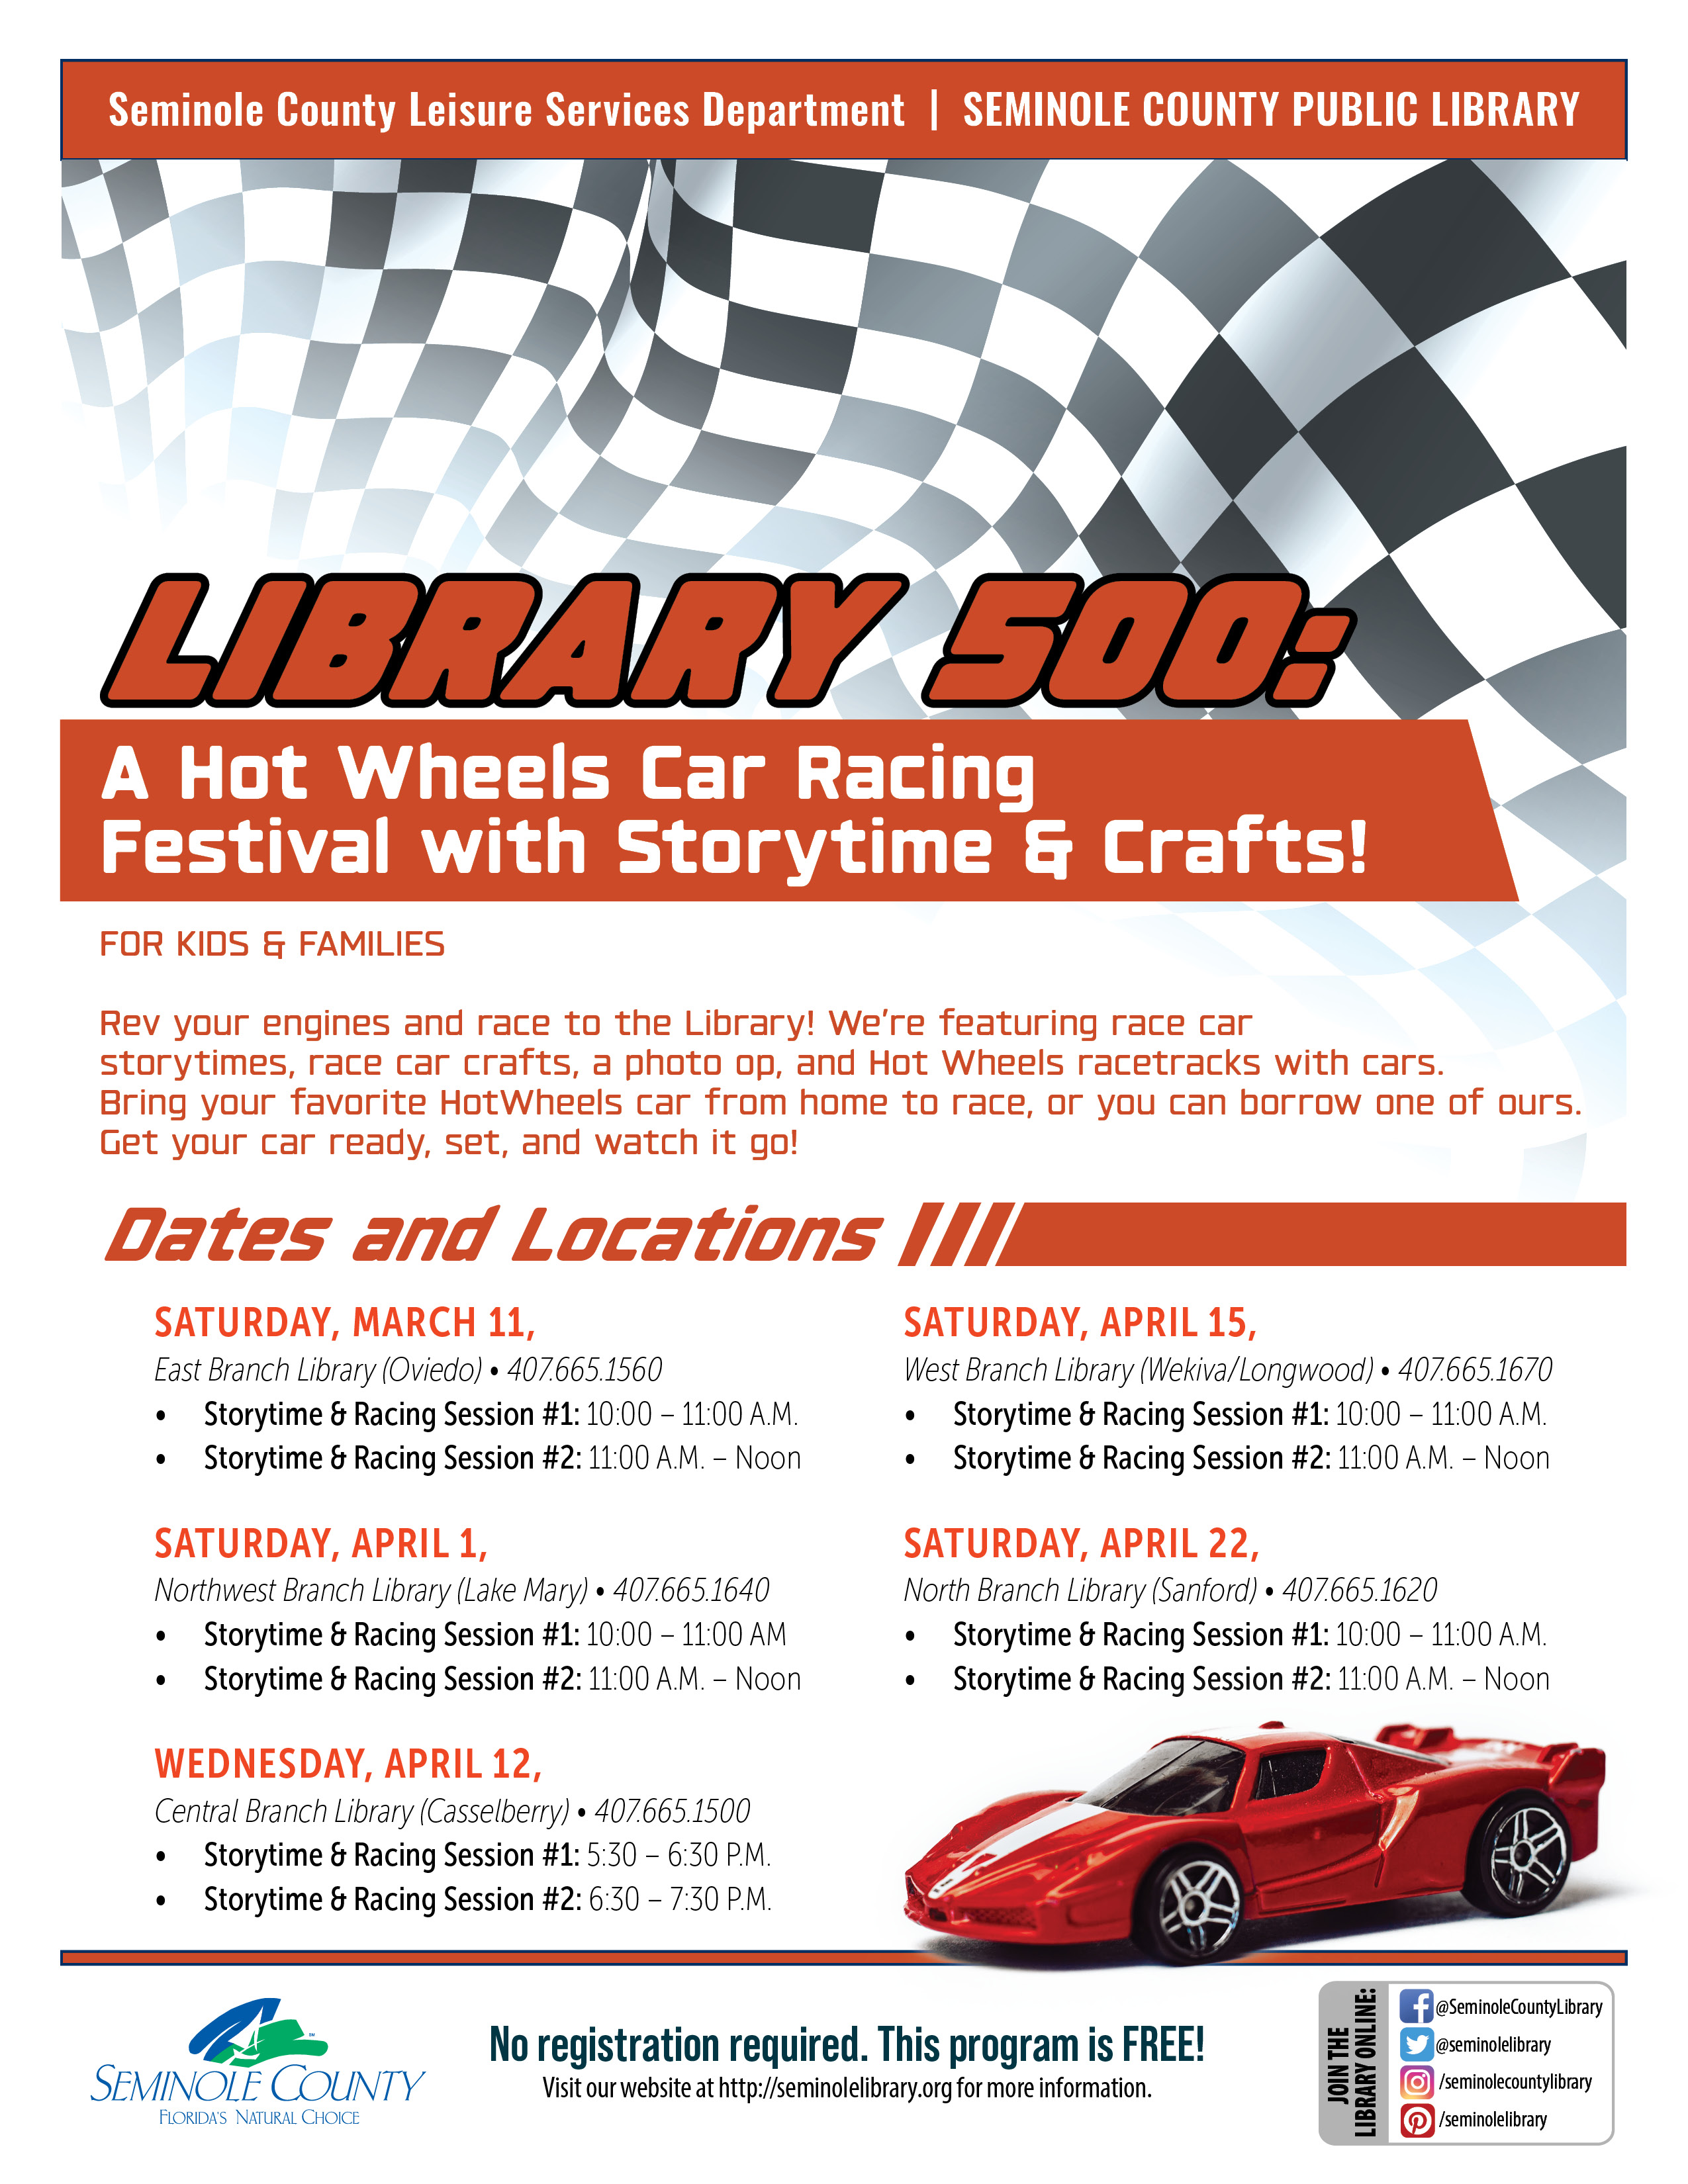 Library 500: A HotWheels Car Racing Festival with Storytime and Crafts!